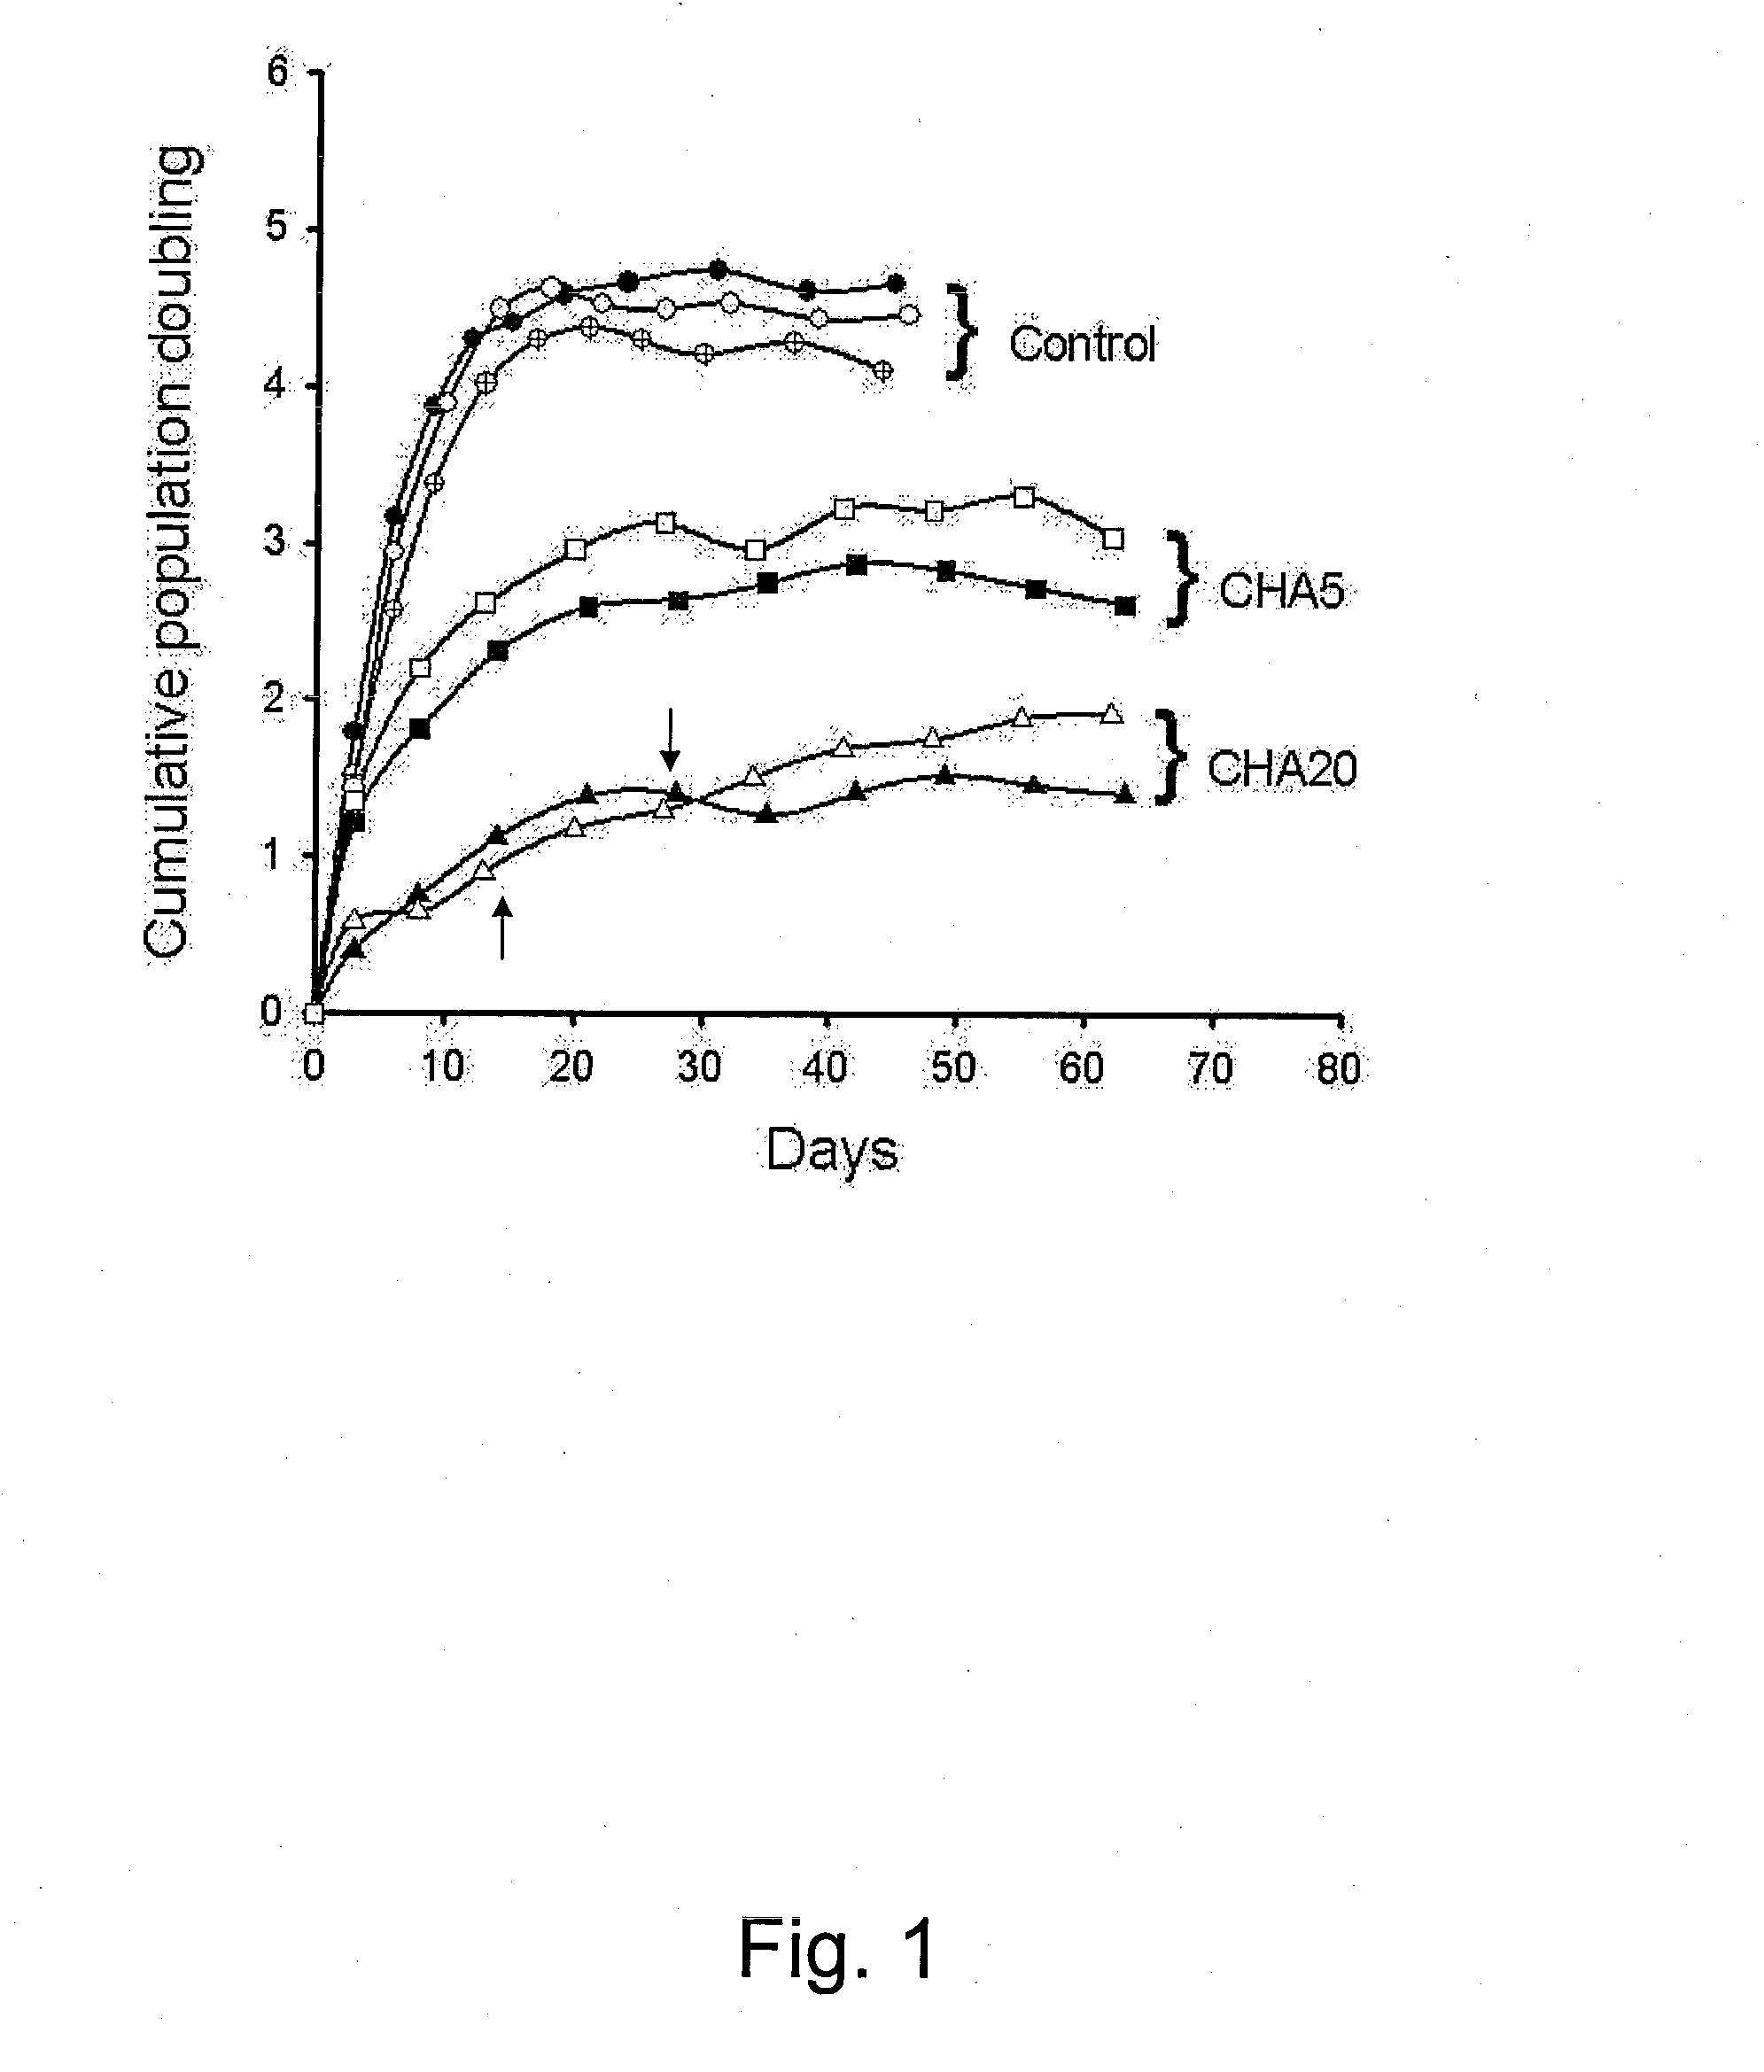 Method for preserving proliferation and differentiation potential of undiffrentiated cells